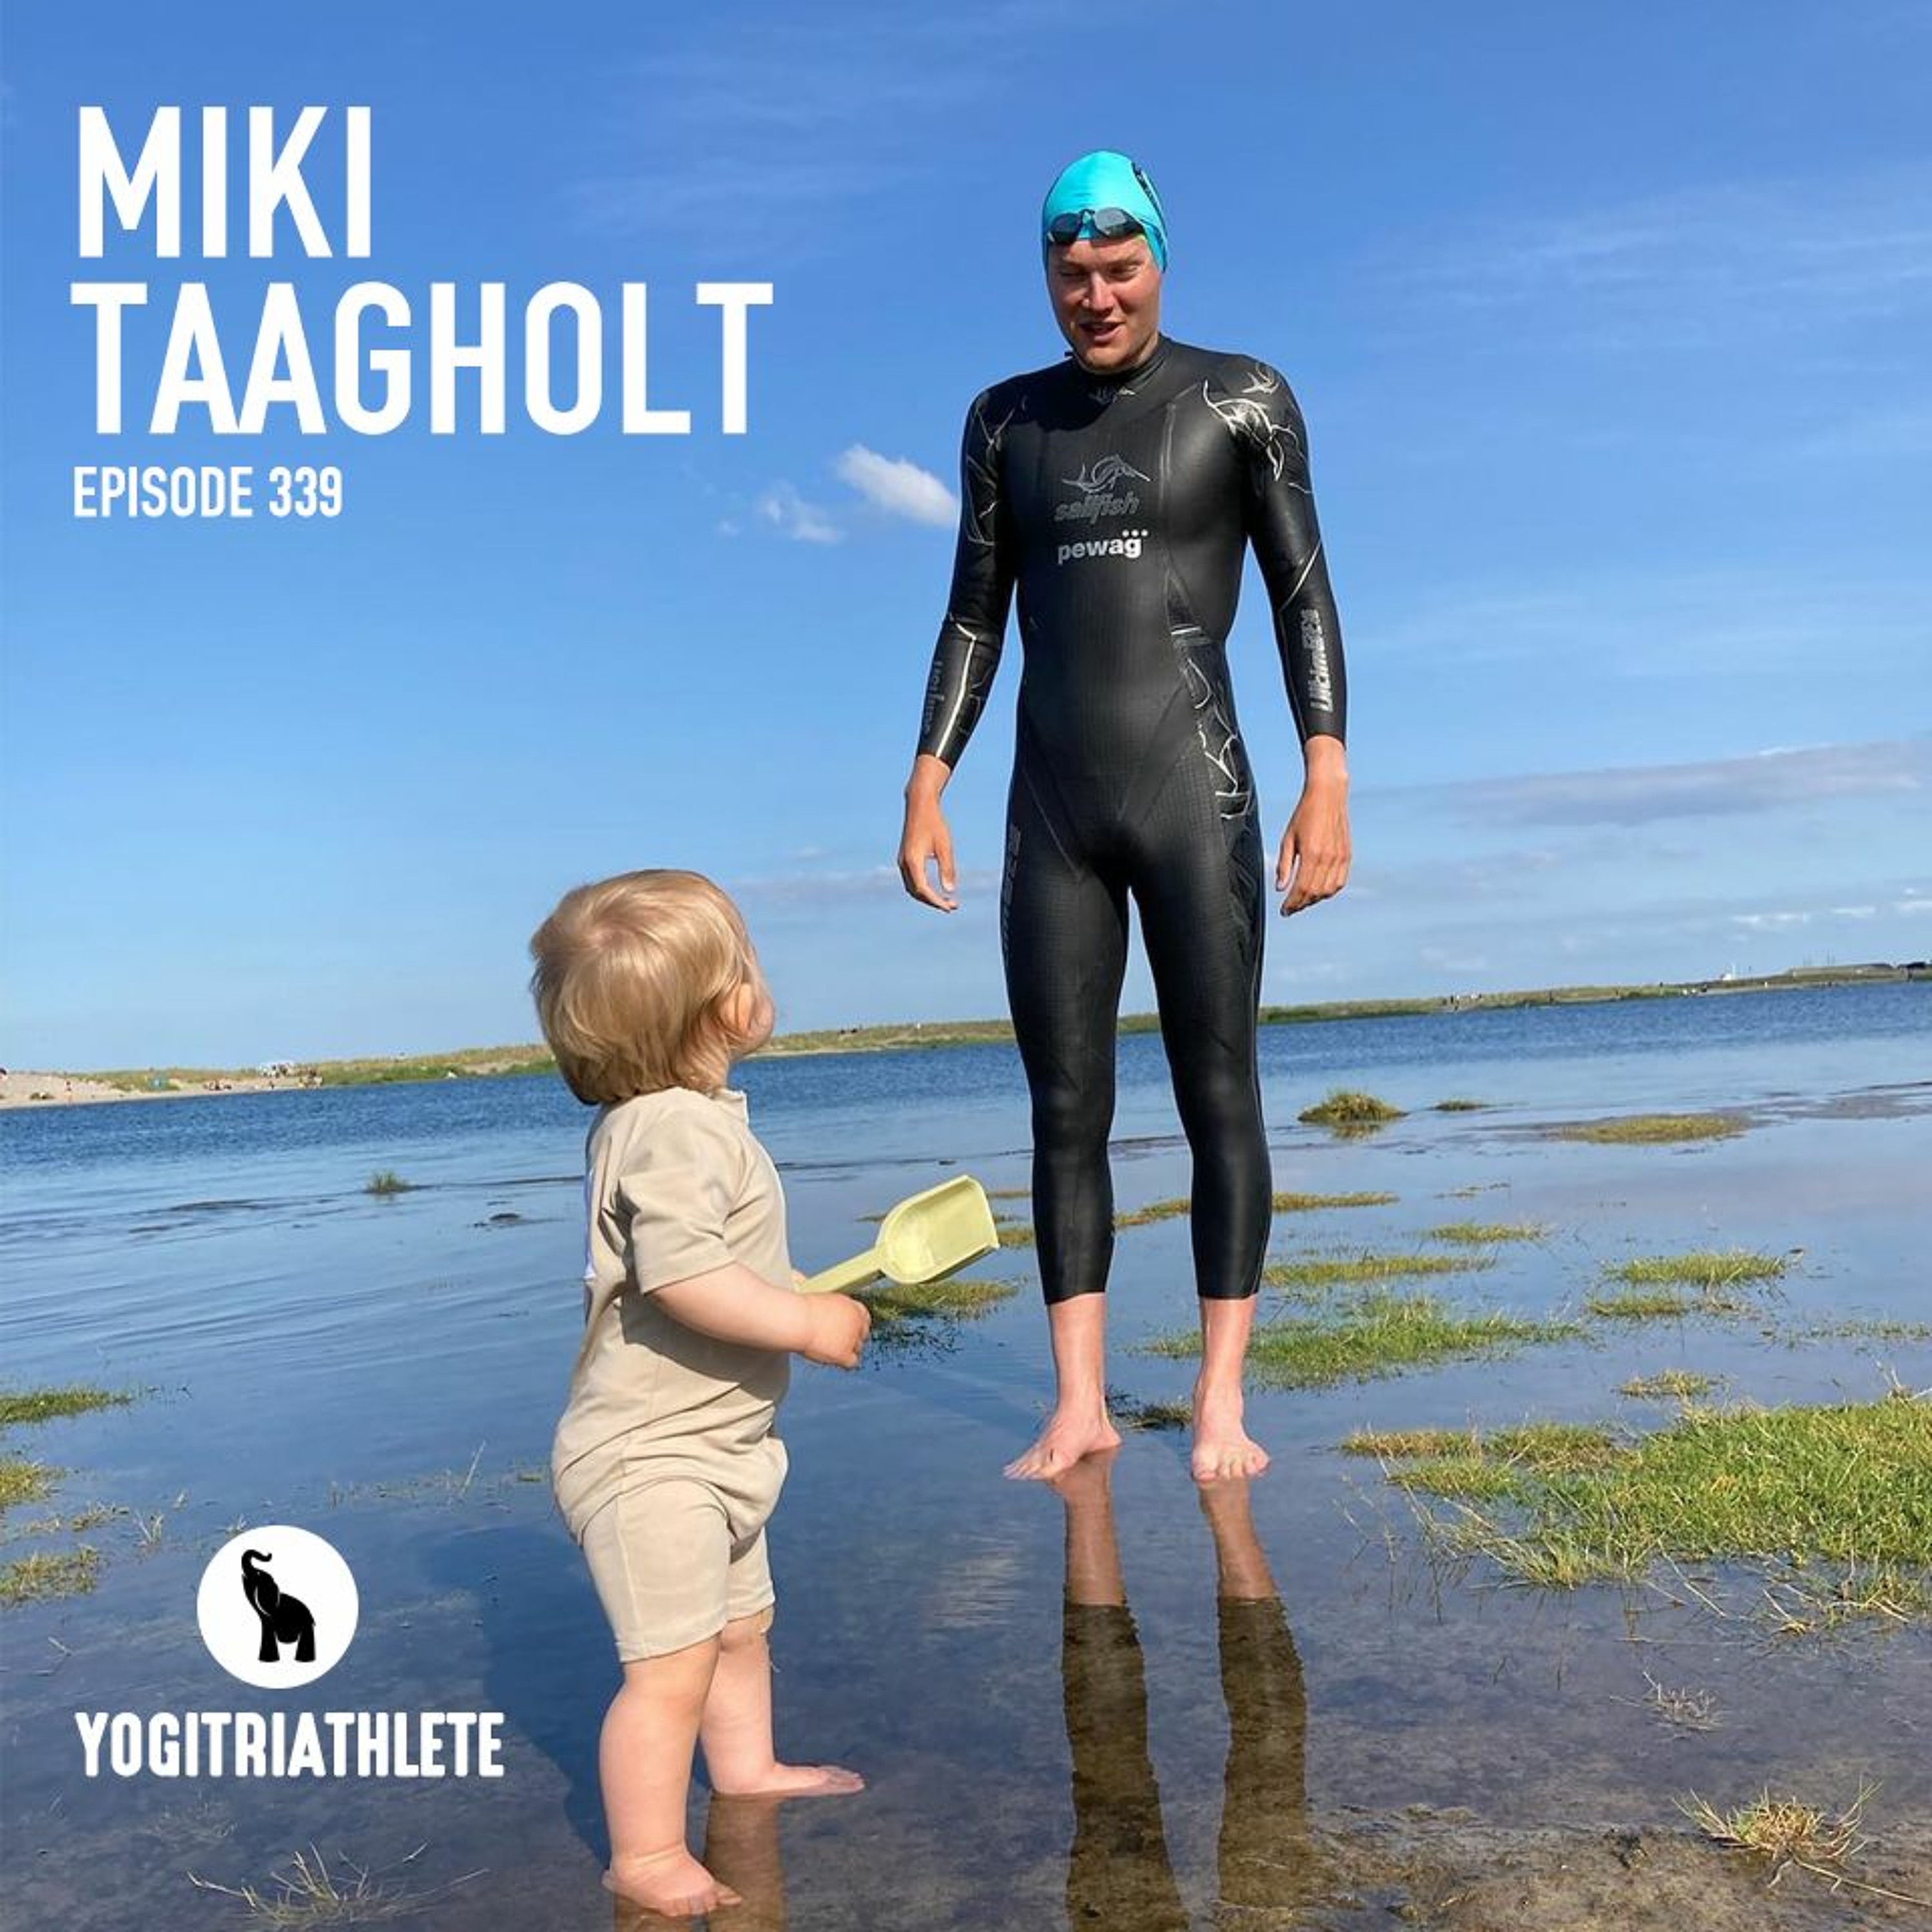 Miki Taagholt, Professional Triathlete On Racing The Best To Be His Best